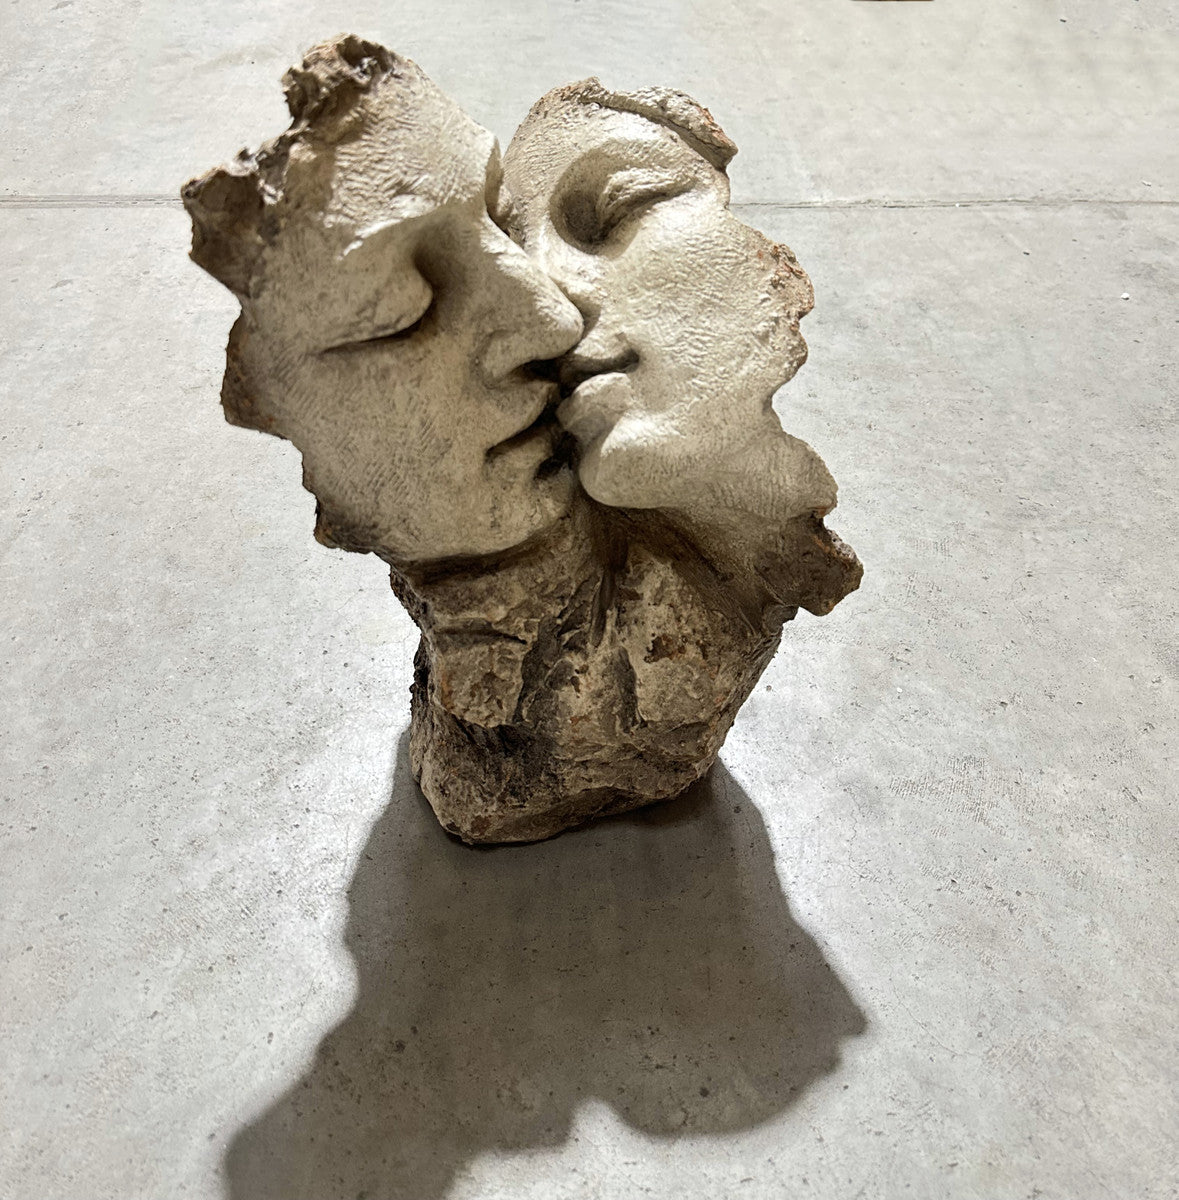 Vintage Kissing Heads - Antique Marble